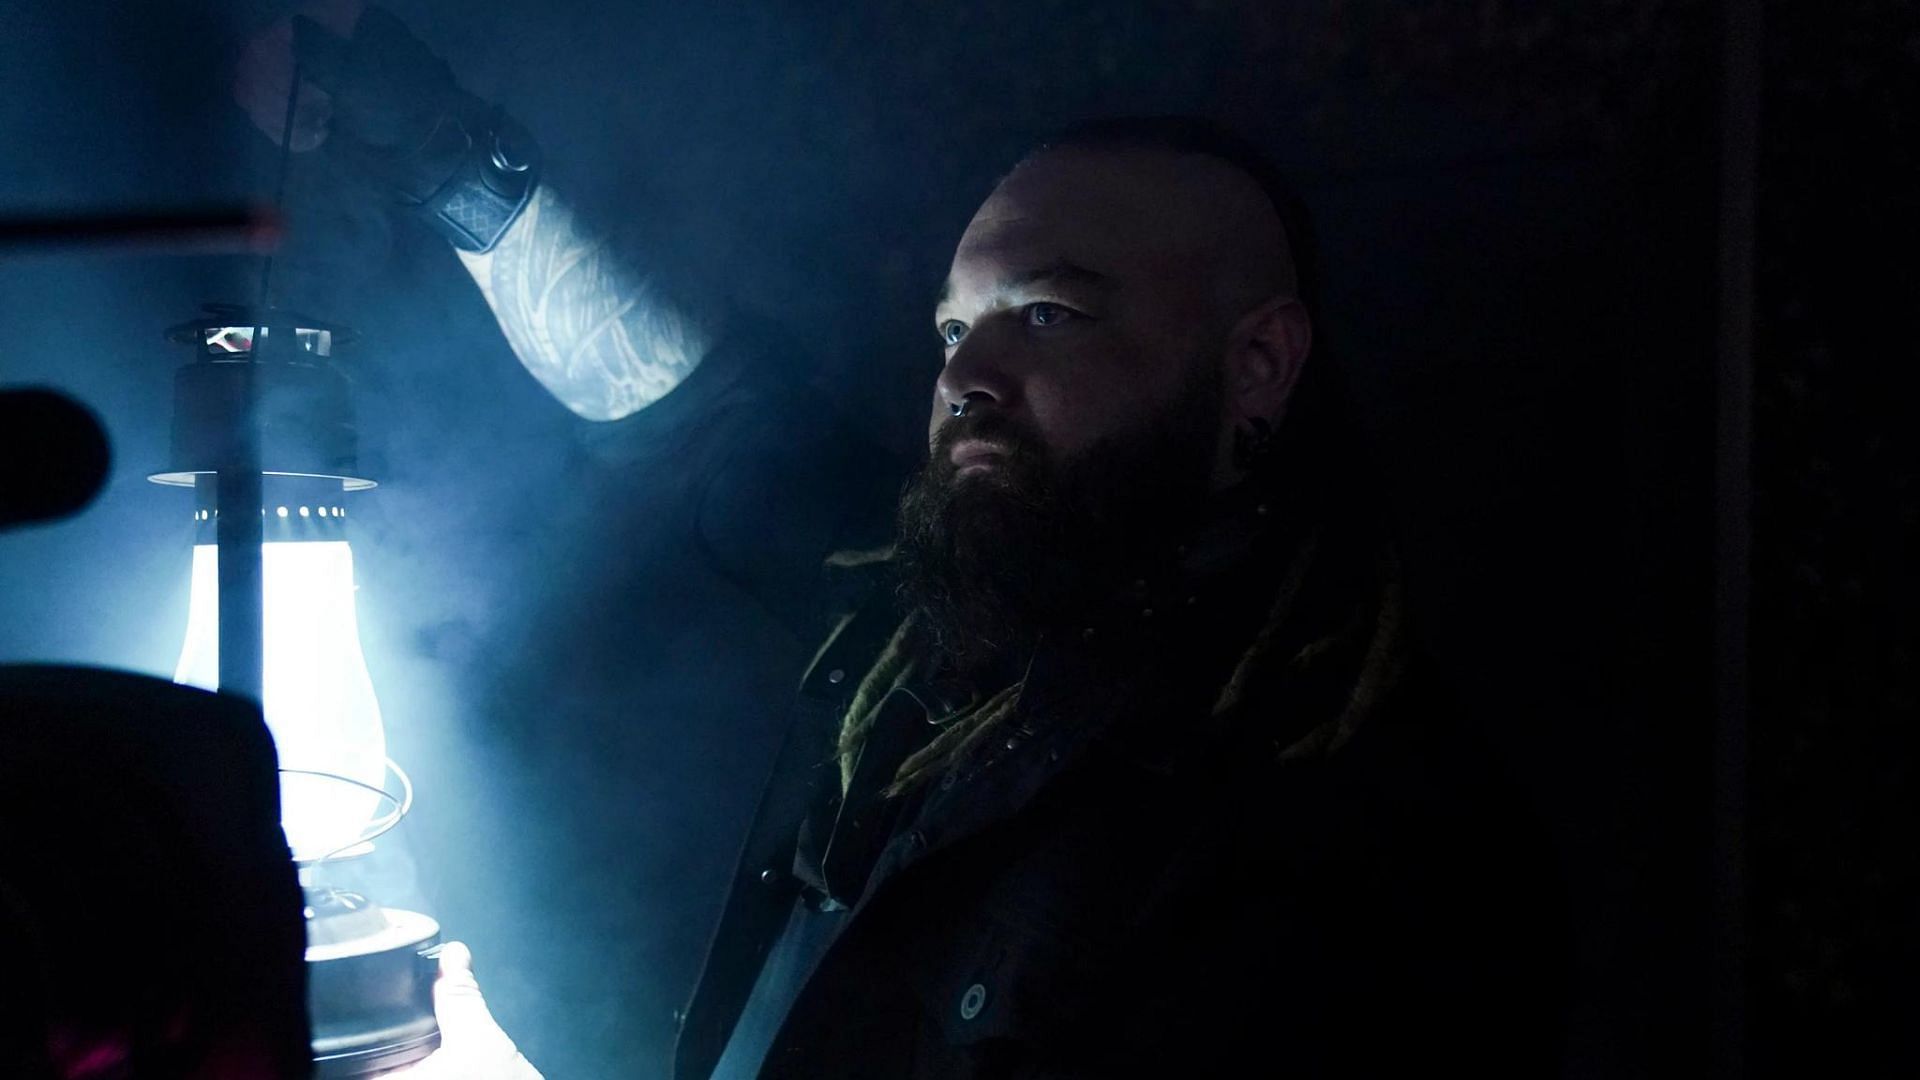 Bray Wyatt made his WWE return at Extreme Rules 2022